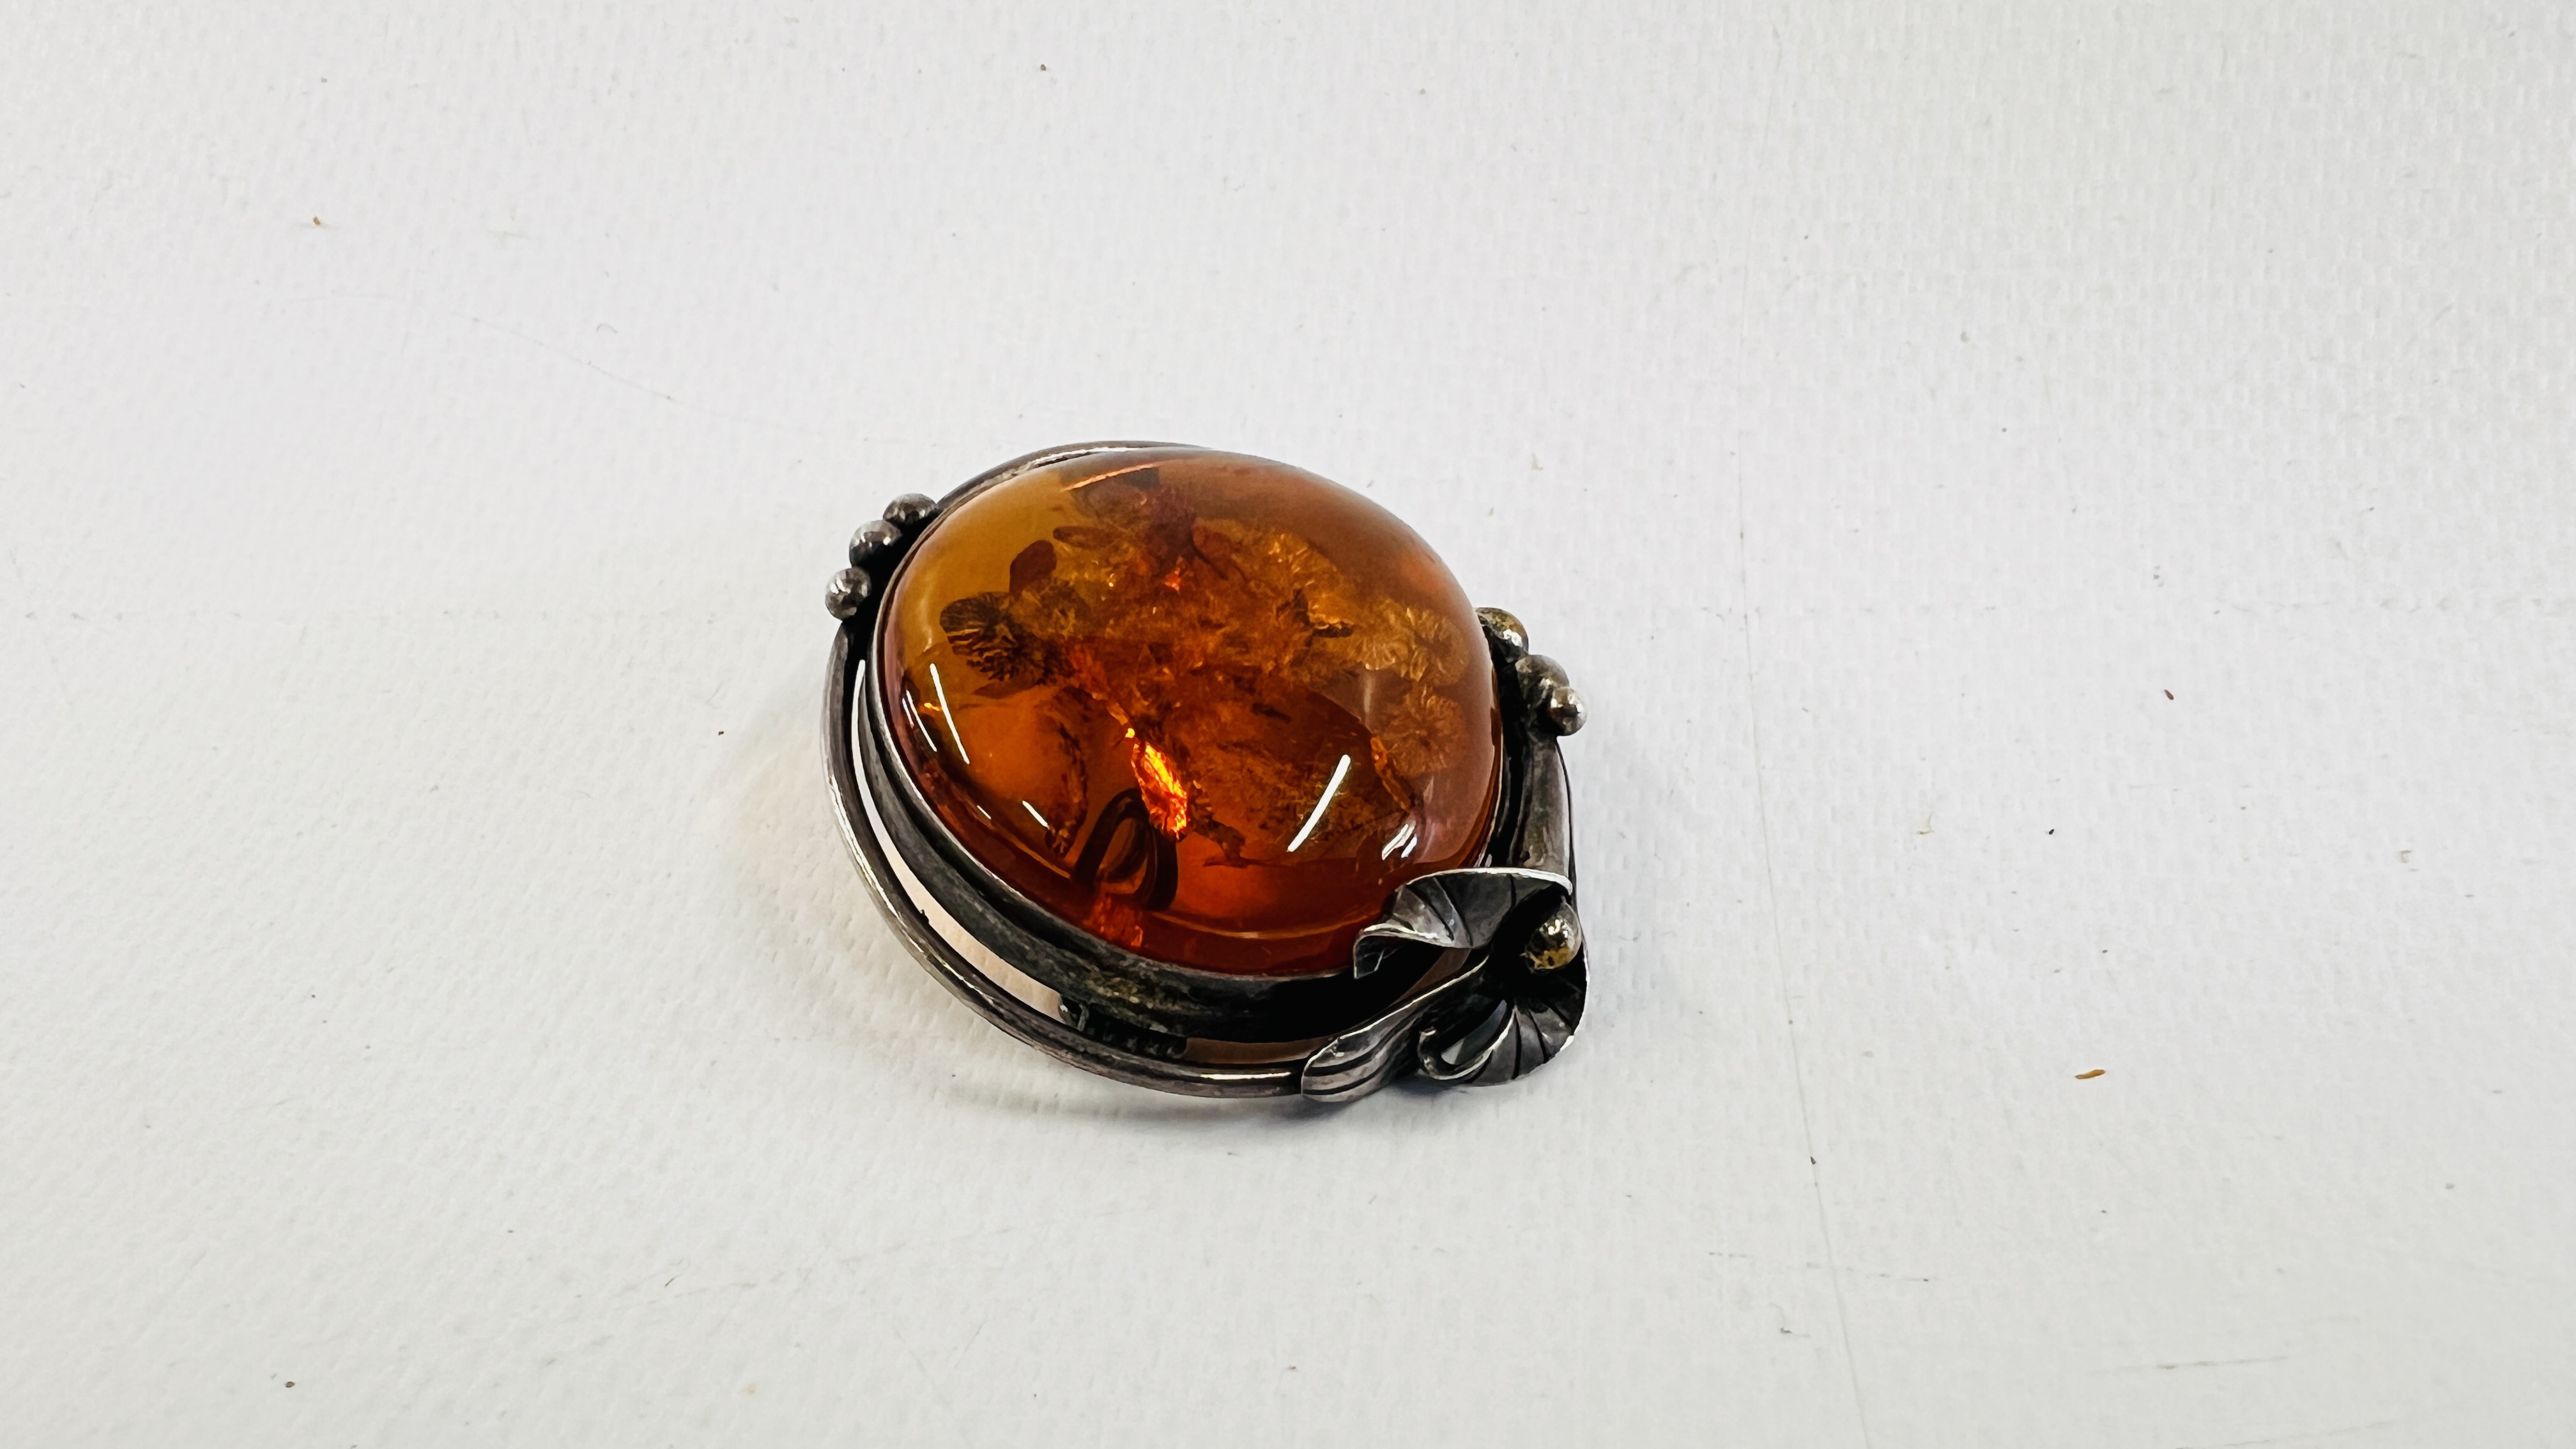 A VINTAGE SILVER BROOCH INSET WITH AN AMBER TYPE STONE. - Image 3 of 5